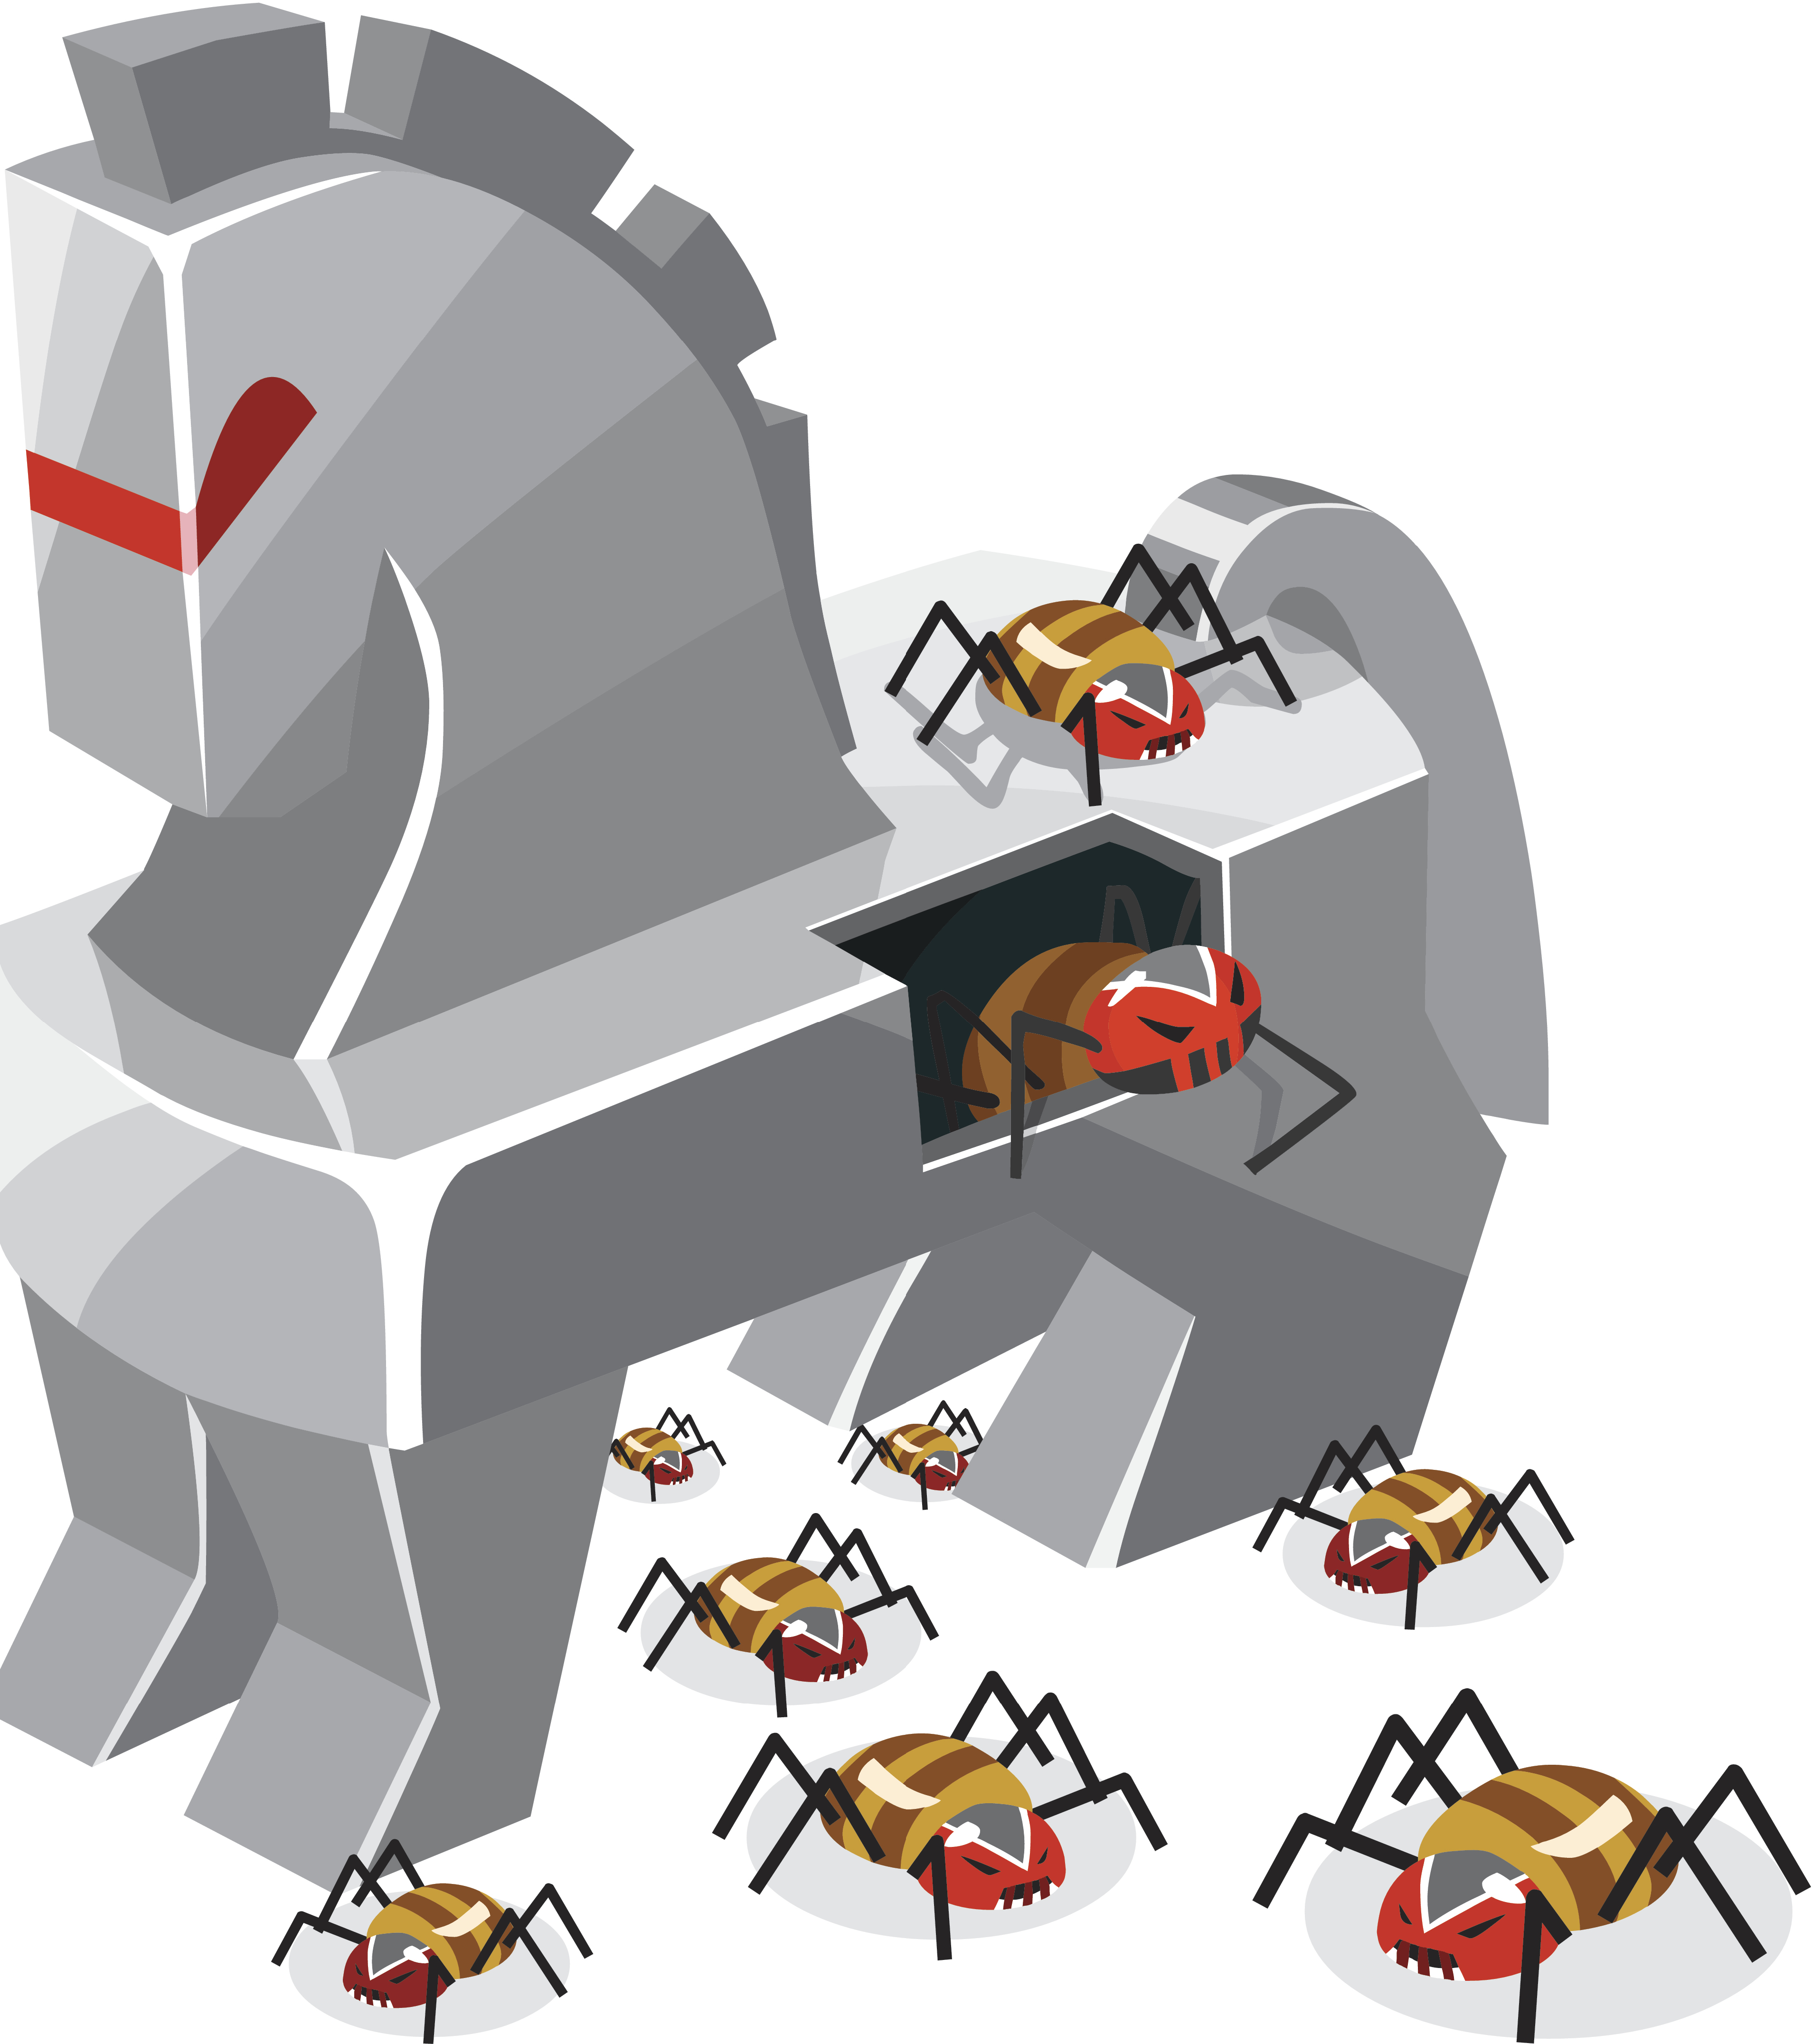 What is a Trojan Horse, and how can we protect ourselves from it